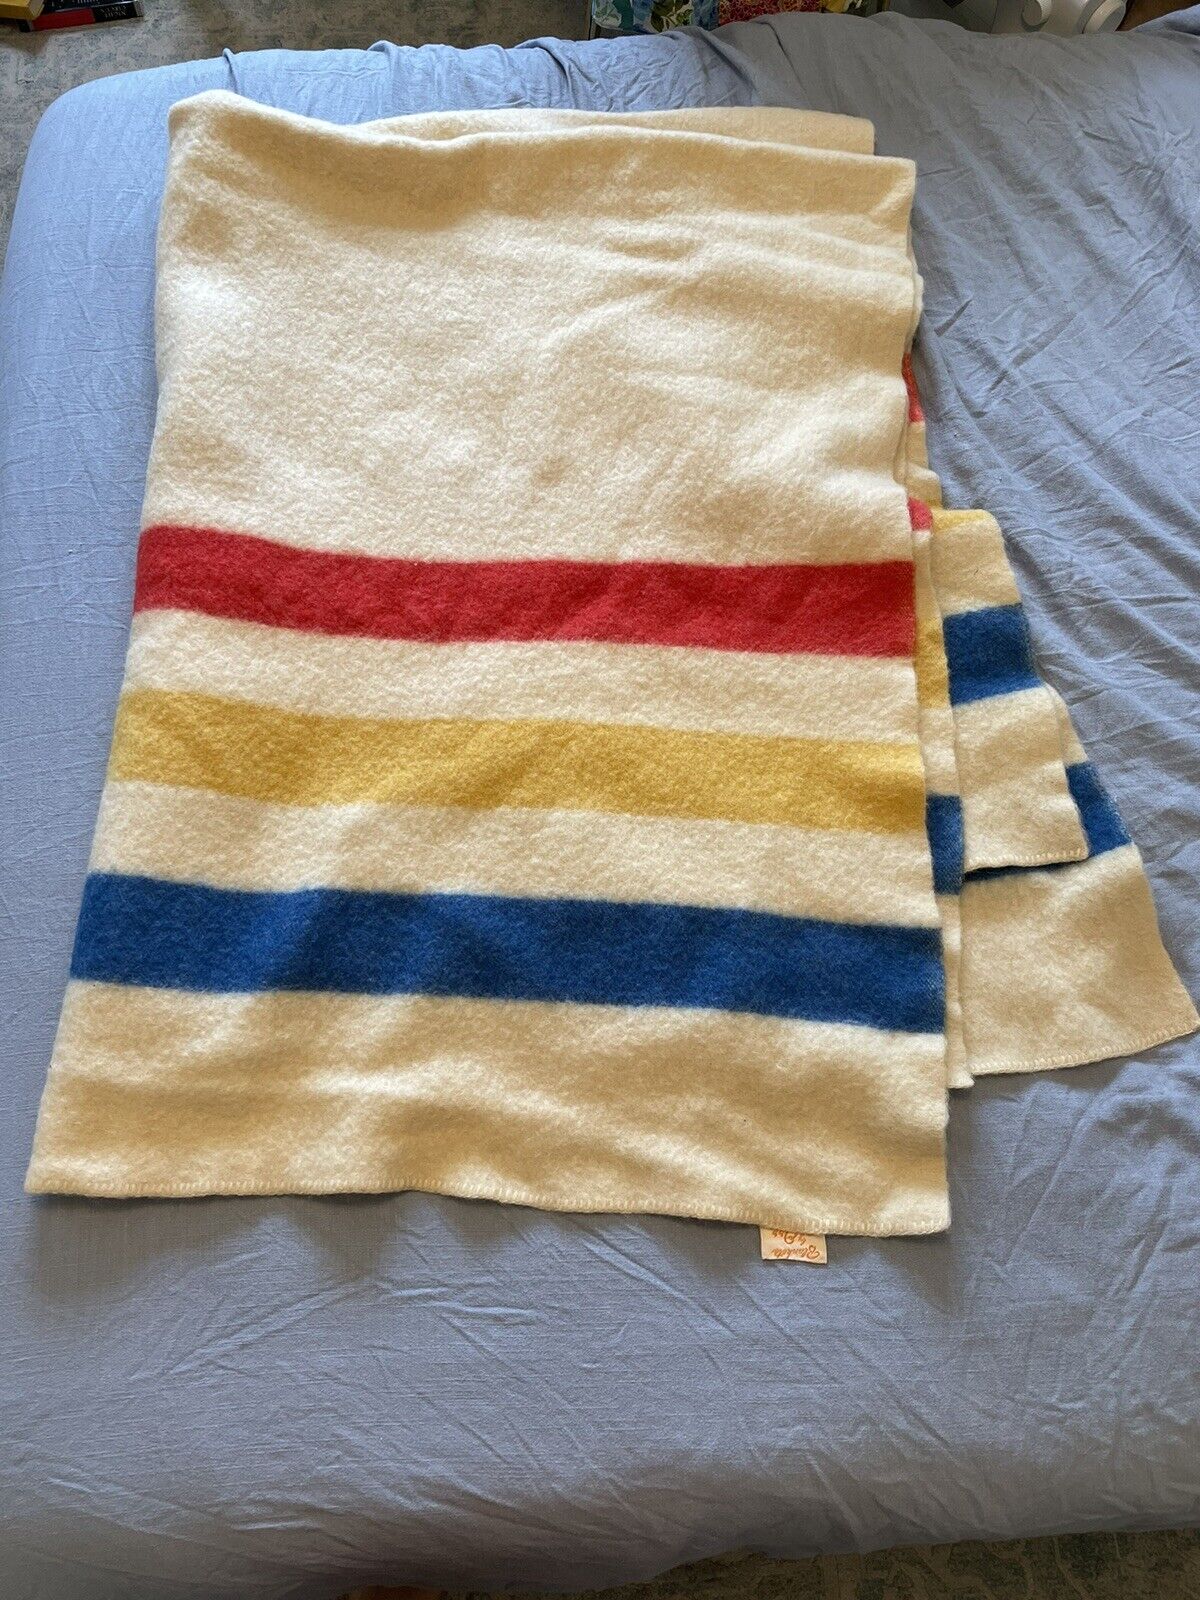 Vintage Orr Felt & Blanket Co. Cream With Blue Yellow & Red Stripes Wool